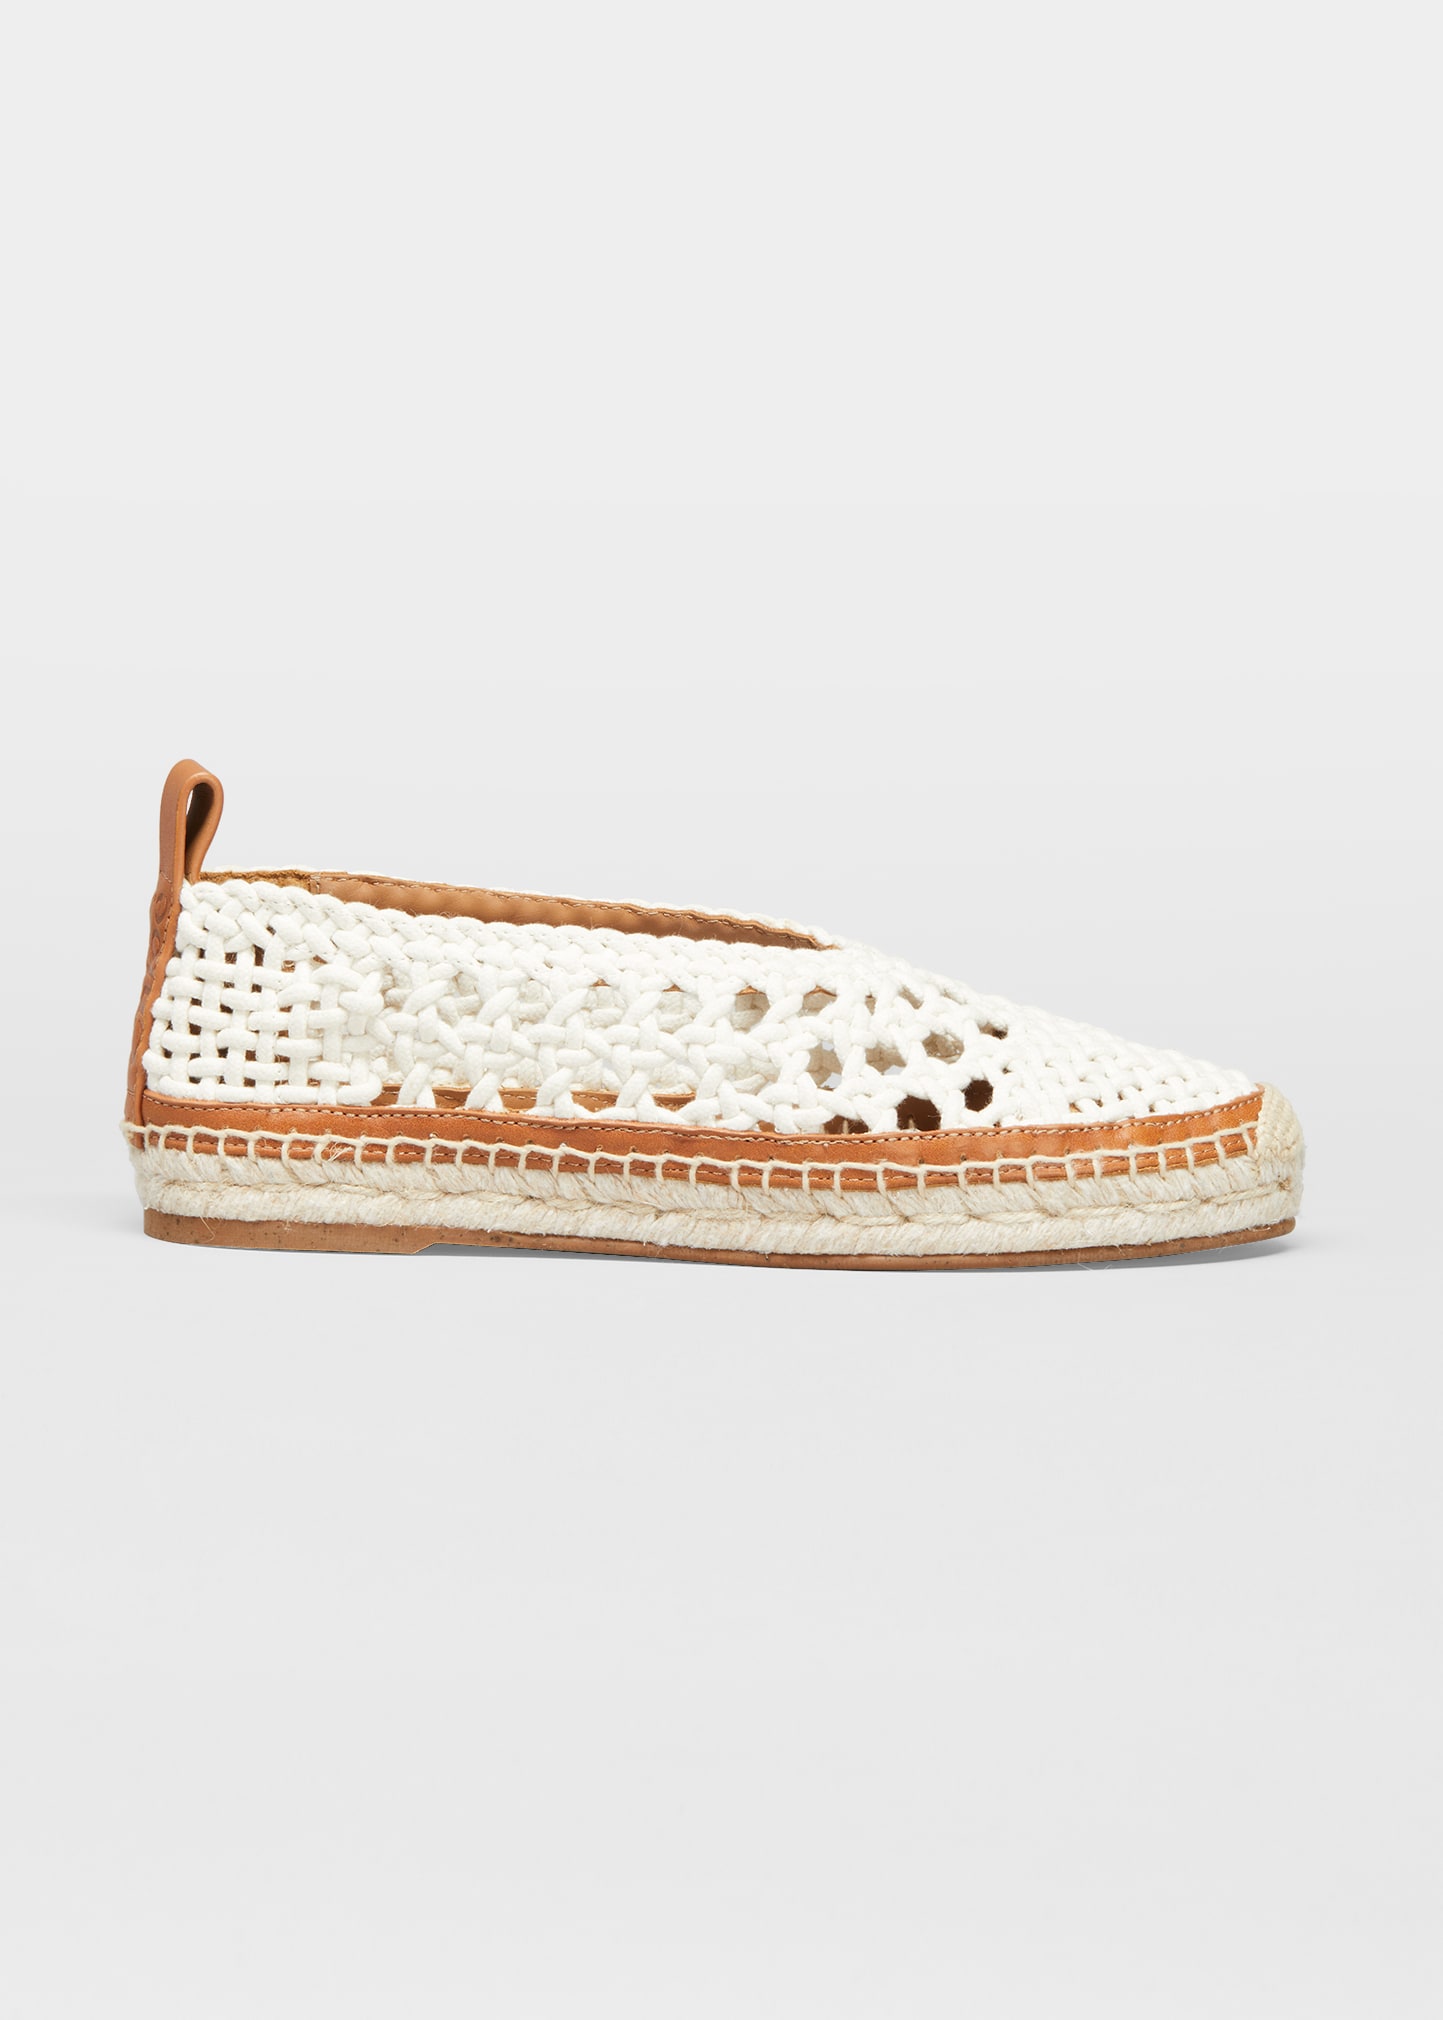 Chloe Luccia Woven Leather Loafer Espadrilles